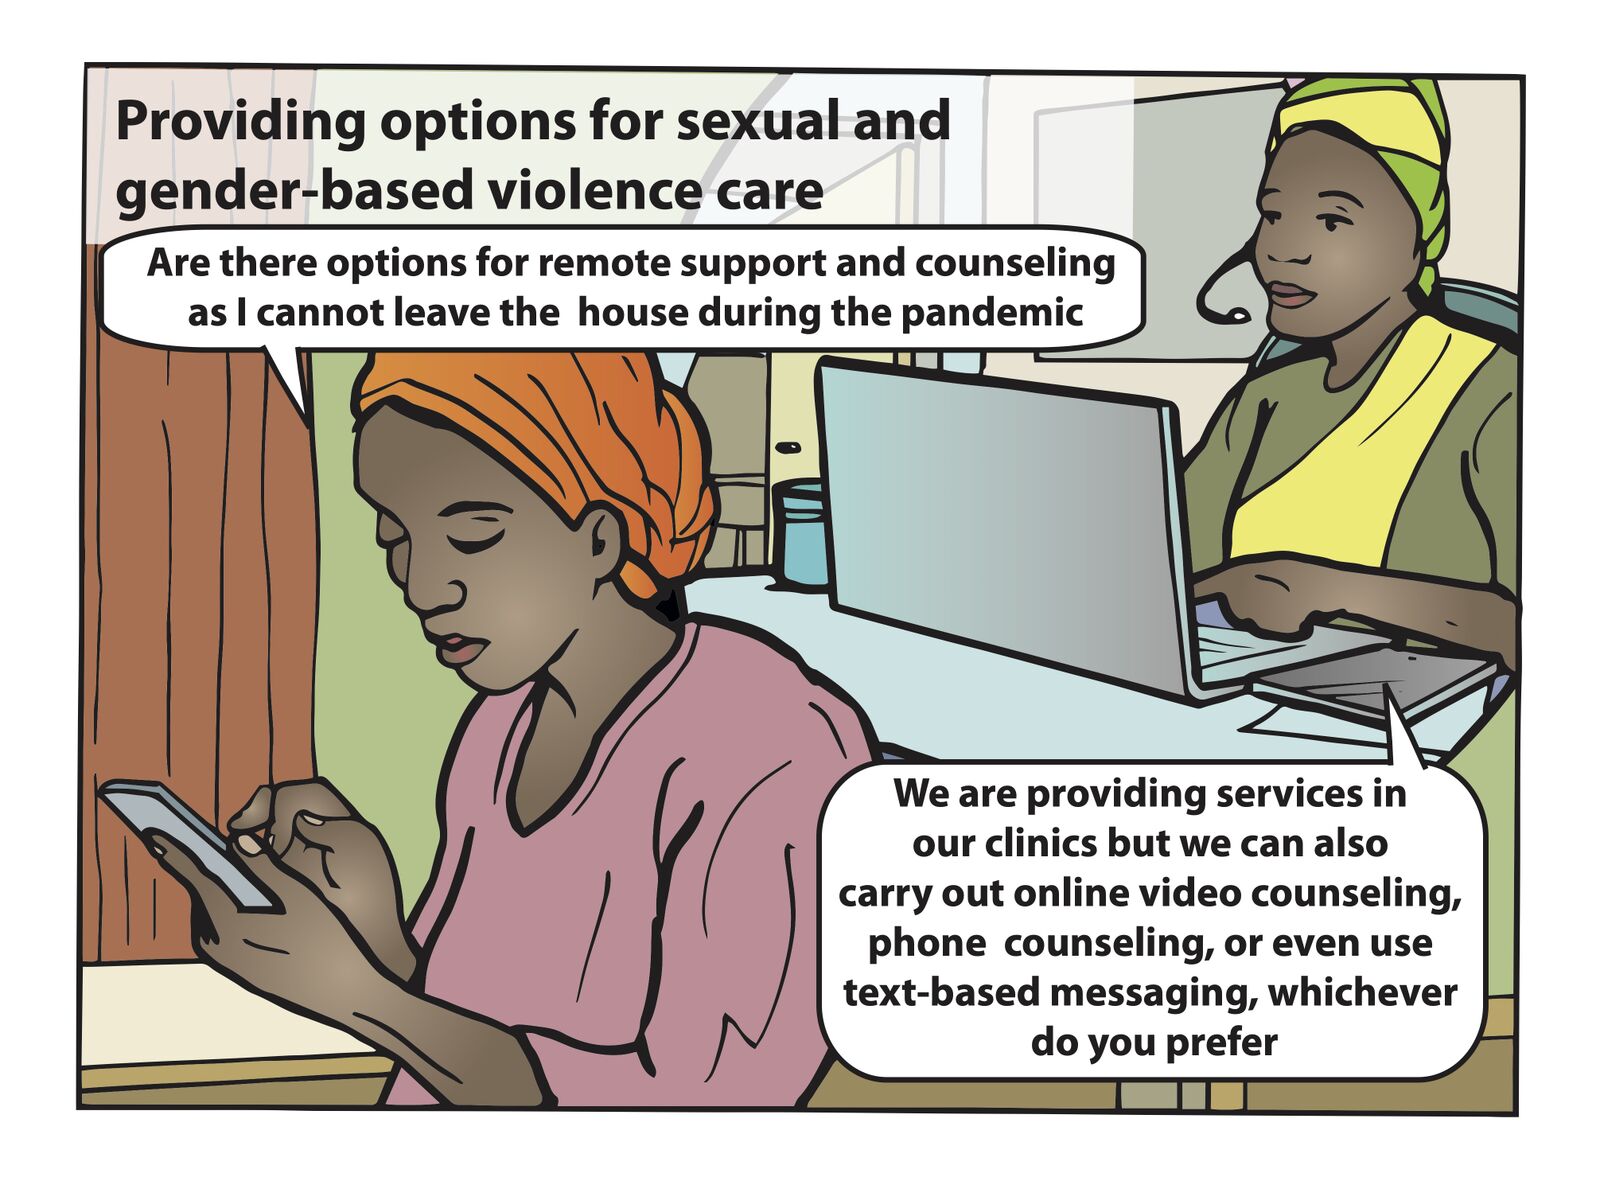 D) Adaptations to sexual and gender-based violence care